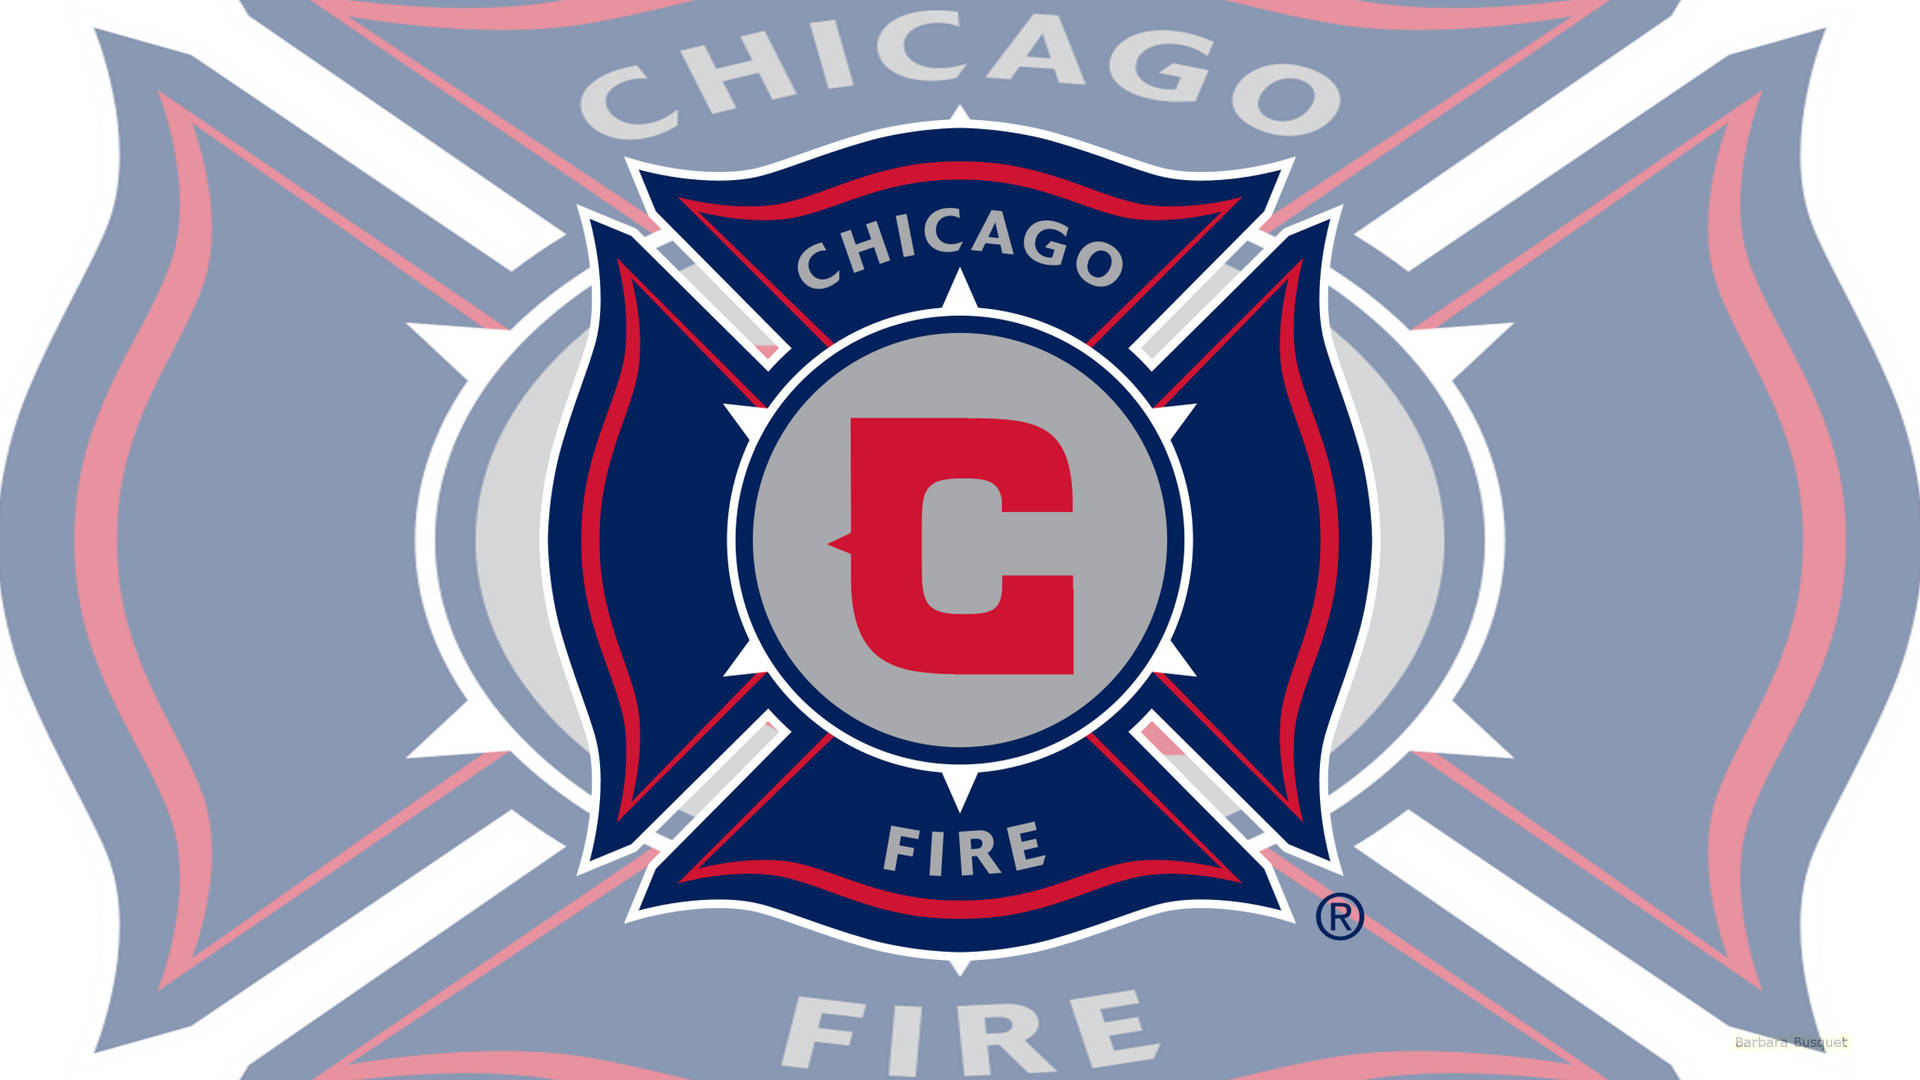 Top 999+ Chicago Fire Wallpaper Full HD, 4K✅Free to Use